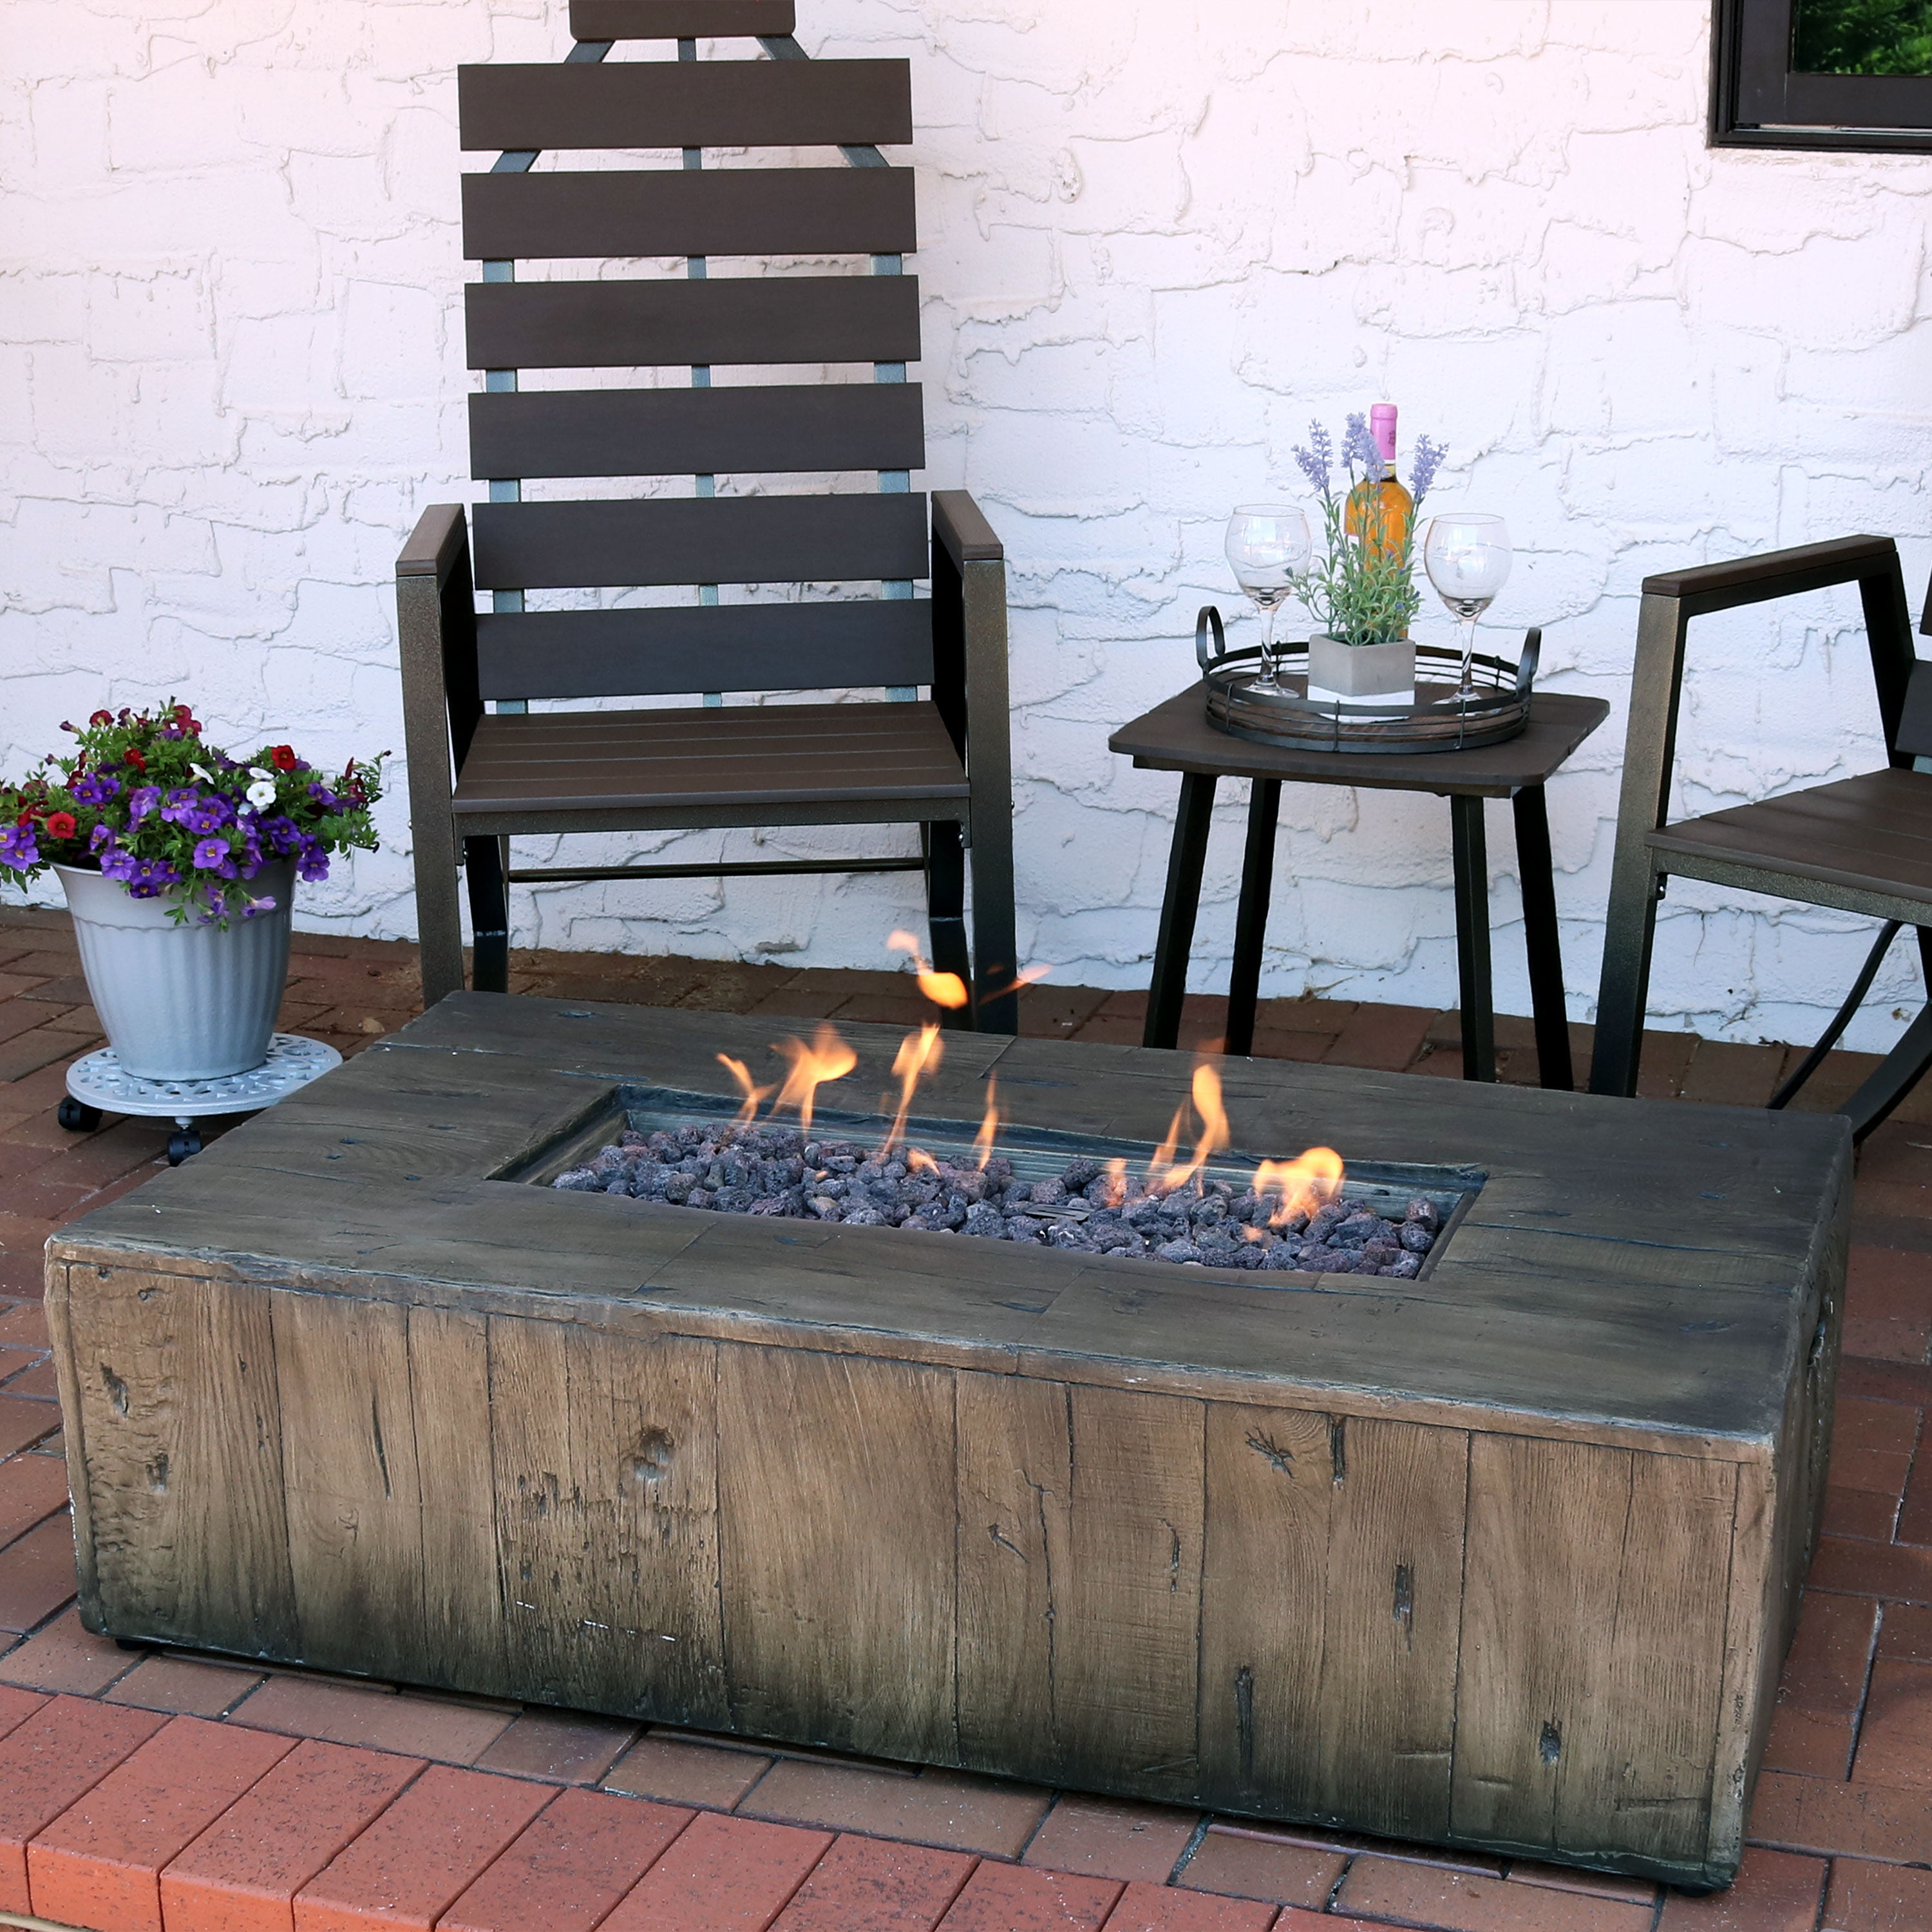 Sunnydaze Rustic Propane Gas Fire Pit, Gas Fire Pit For Covered Porch